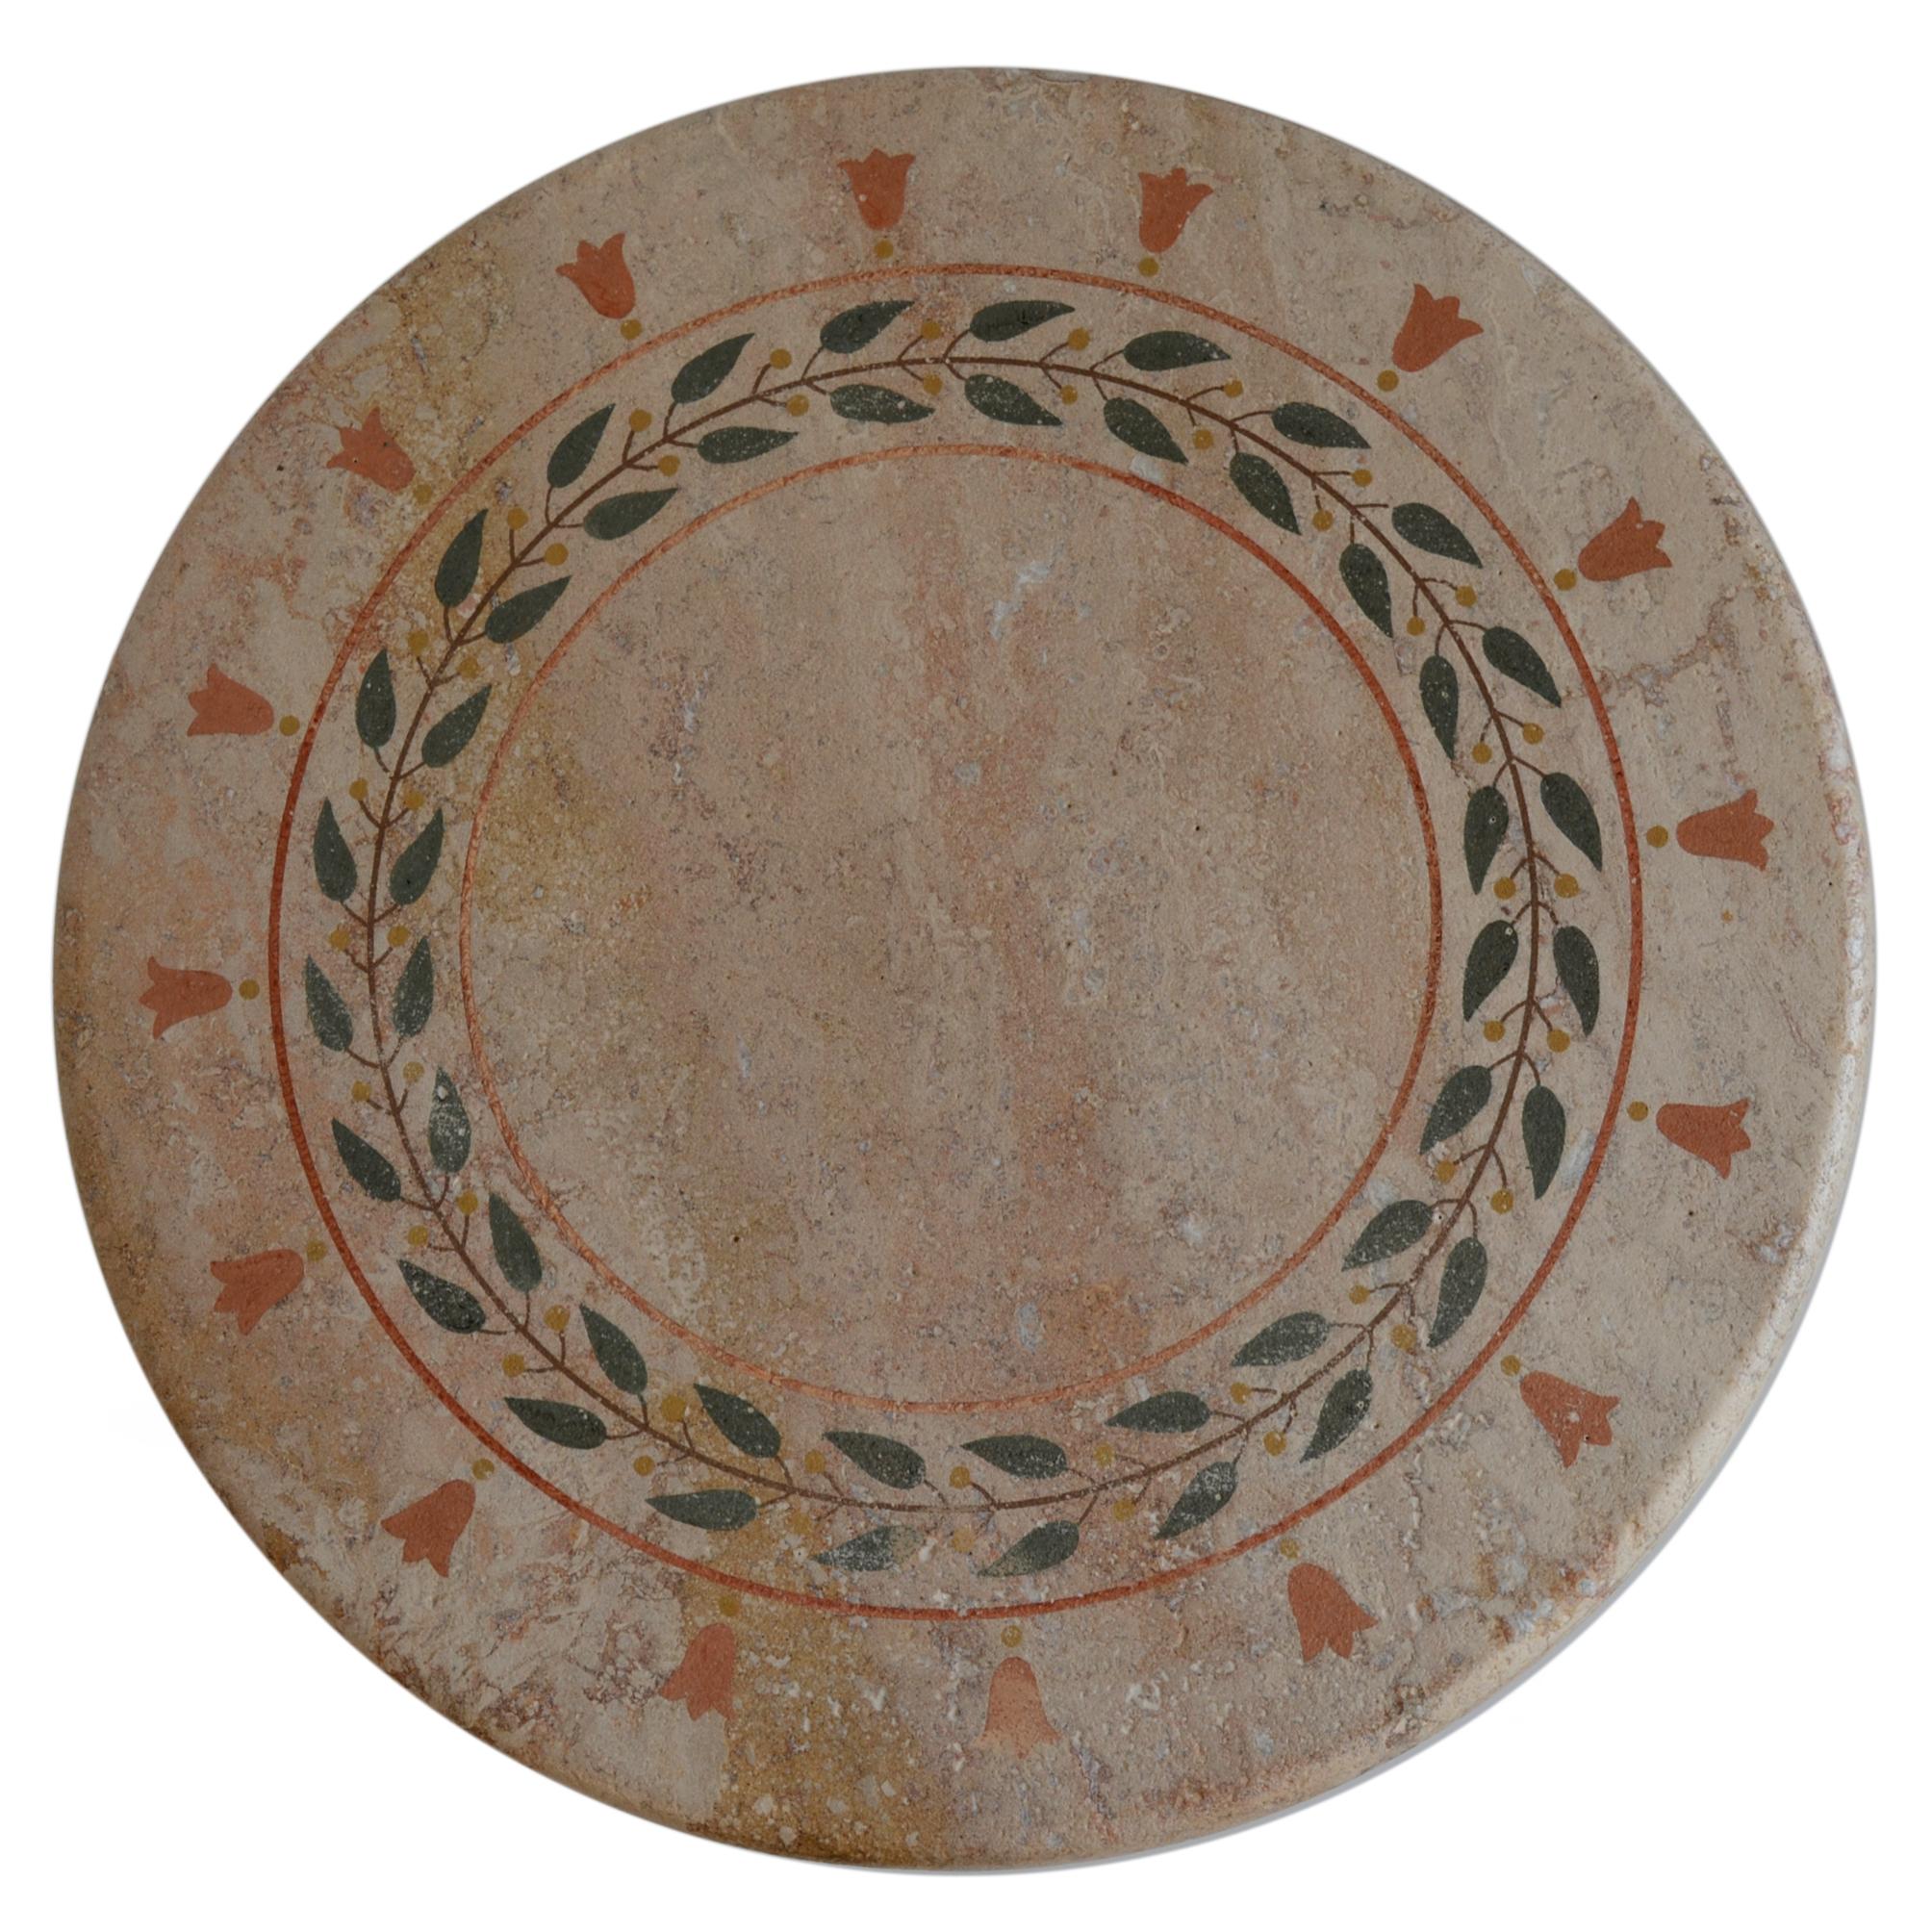 This table can be used as tea table, side table, lamp table it has multiple uses.
The top is manufactured in Travertine decorated with scagliola art inlays, technique of the 16th century. The classical decoration stands on a simple iron base in a